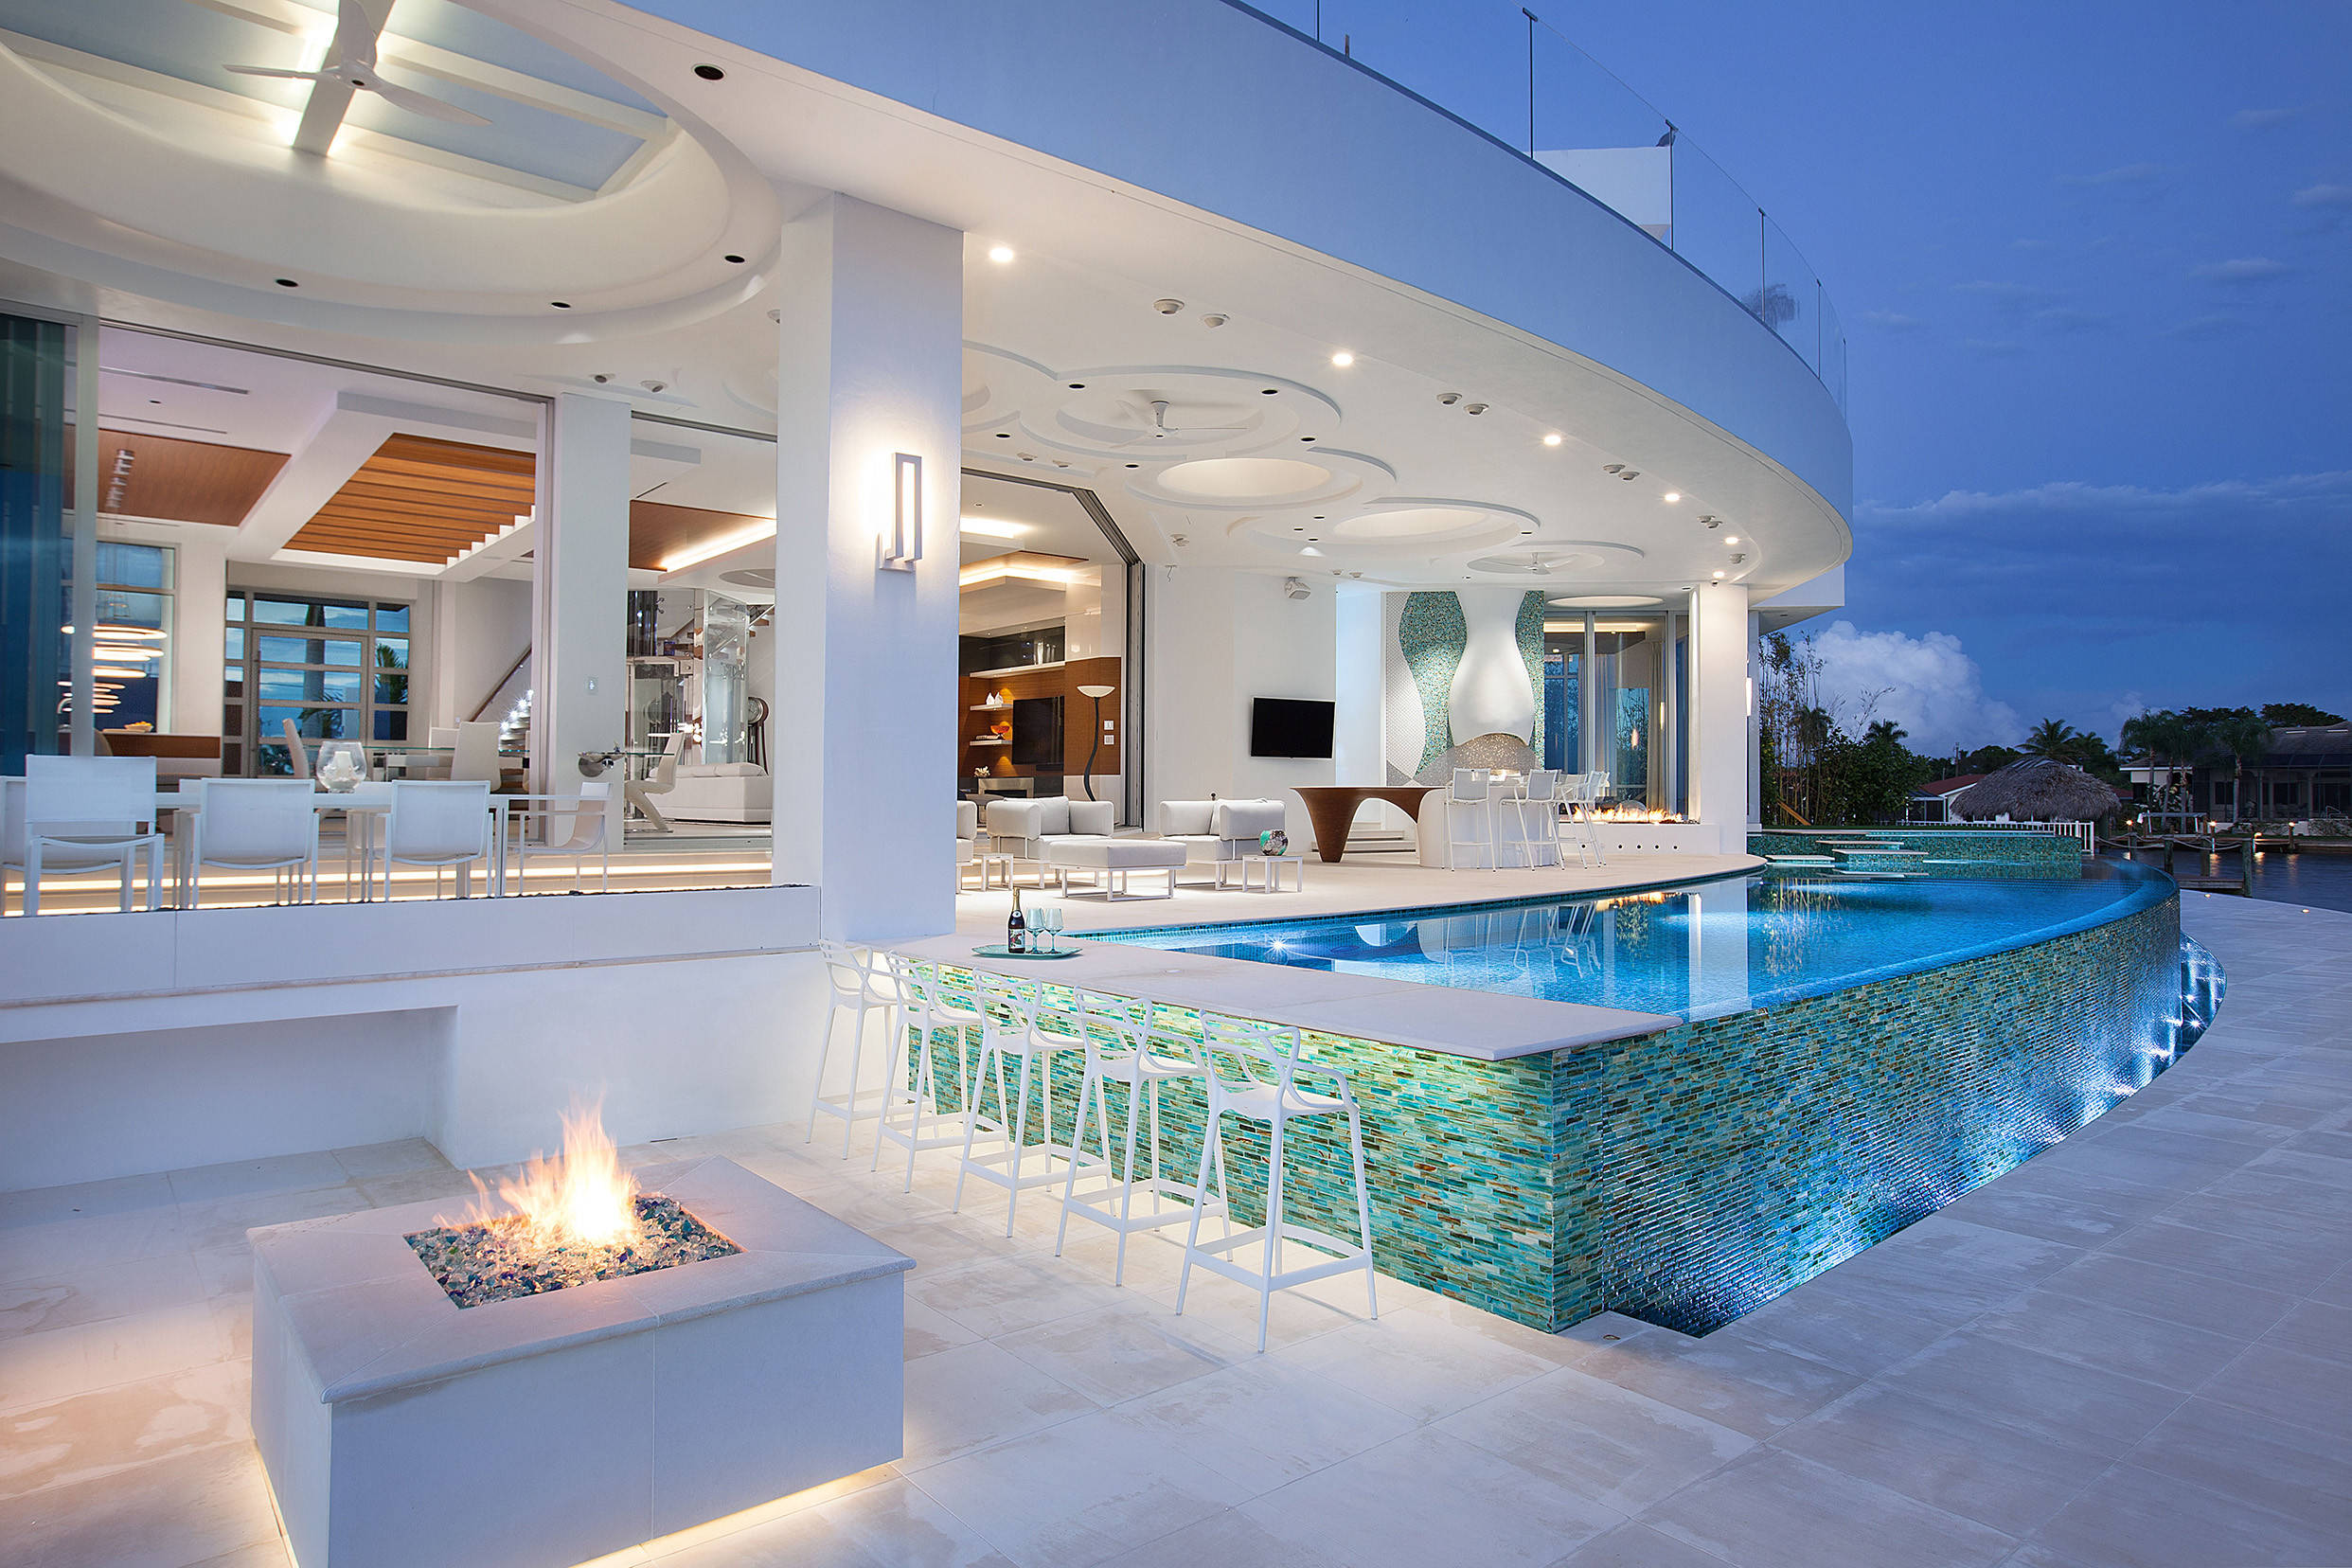 75 Tile Pool Ideas You'Ll Love - May, 2023 | Houzz